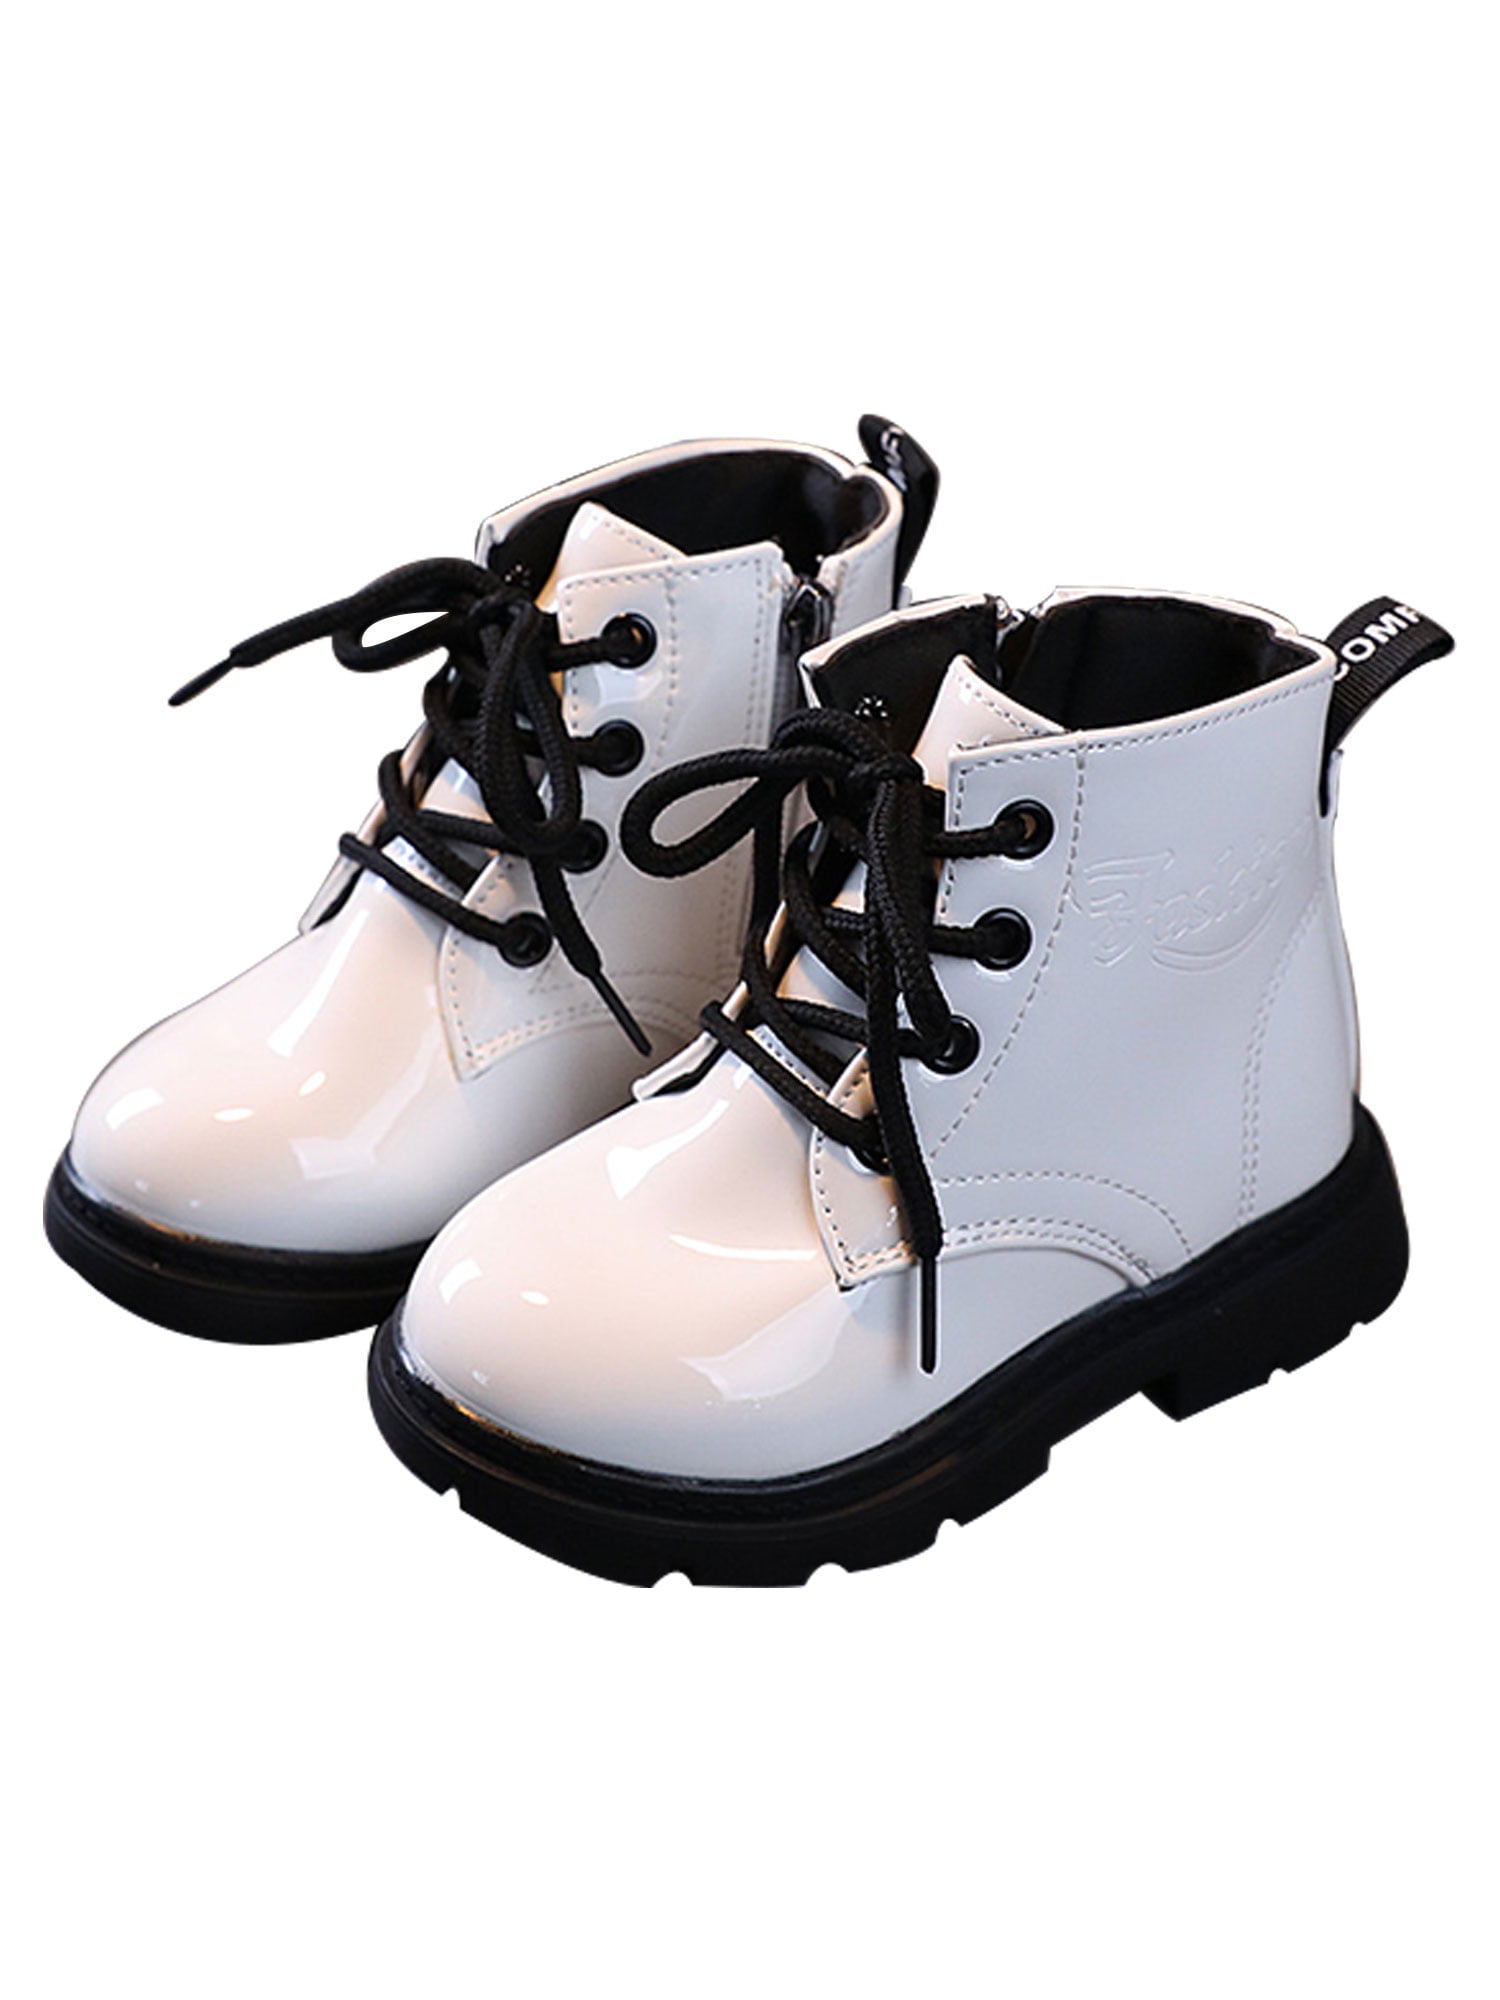 SHINY KIDS Ankle Girls Womens boots Fur lined GRIP SOLE ARMY COMBAT WINTER SHOES 